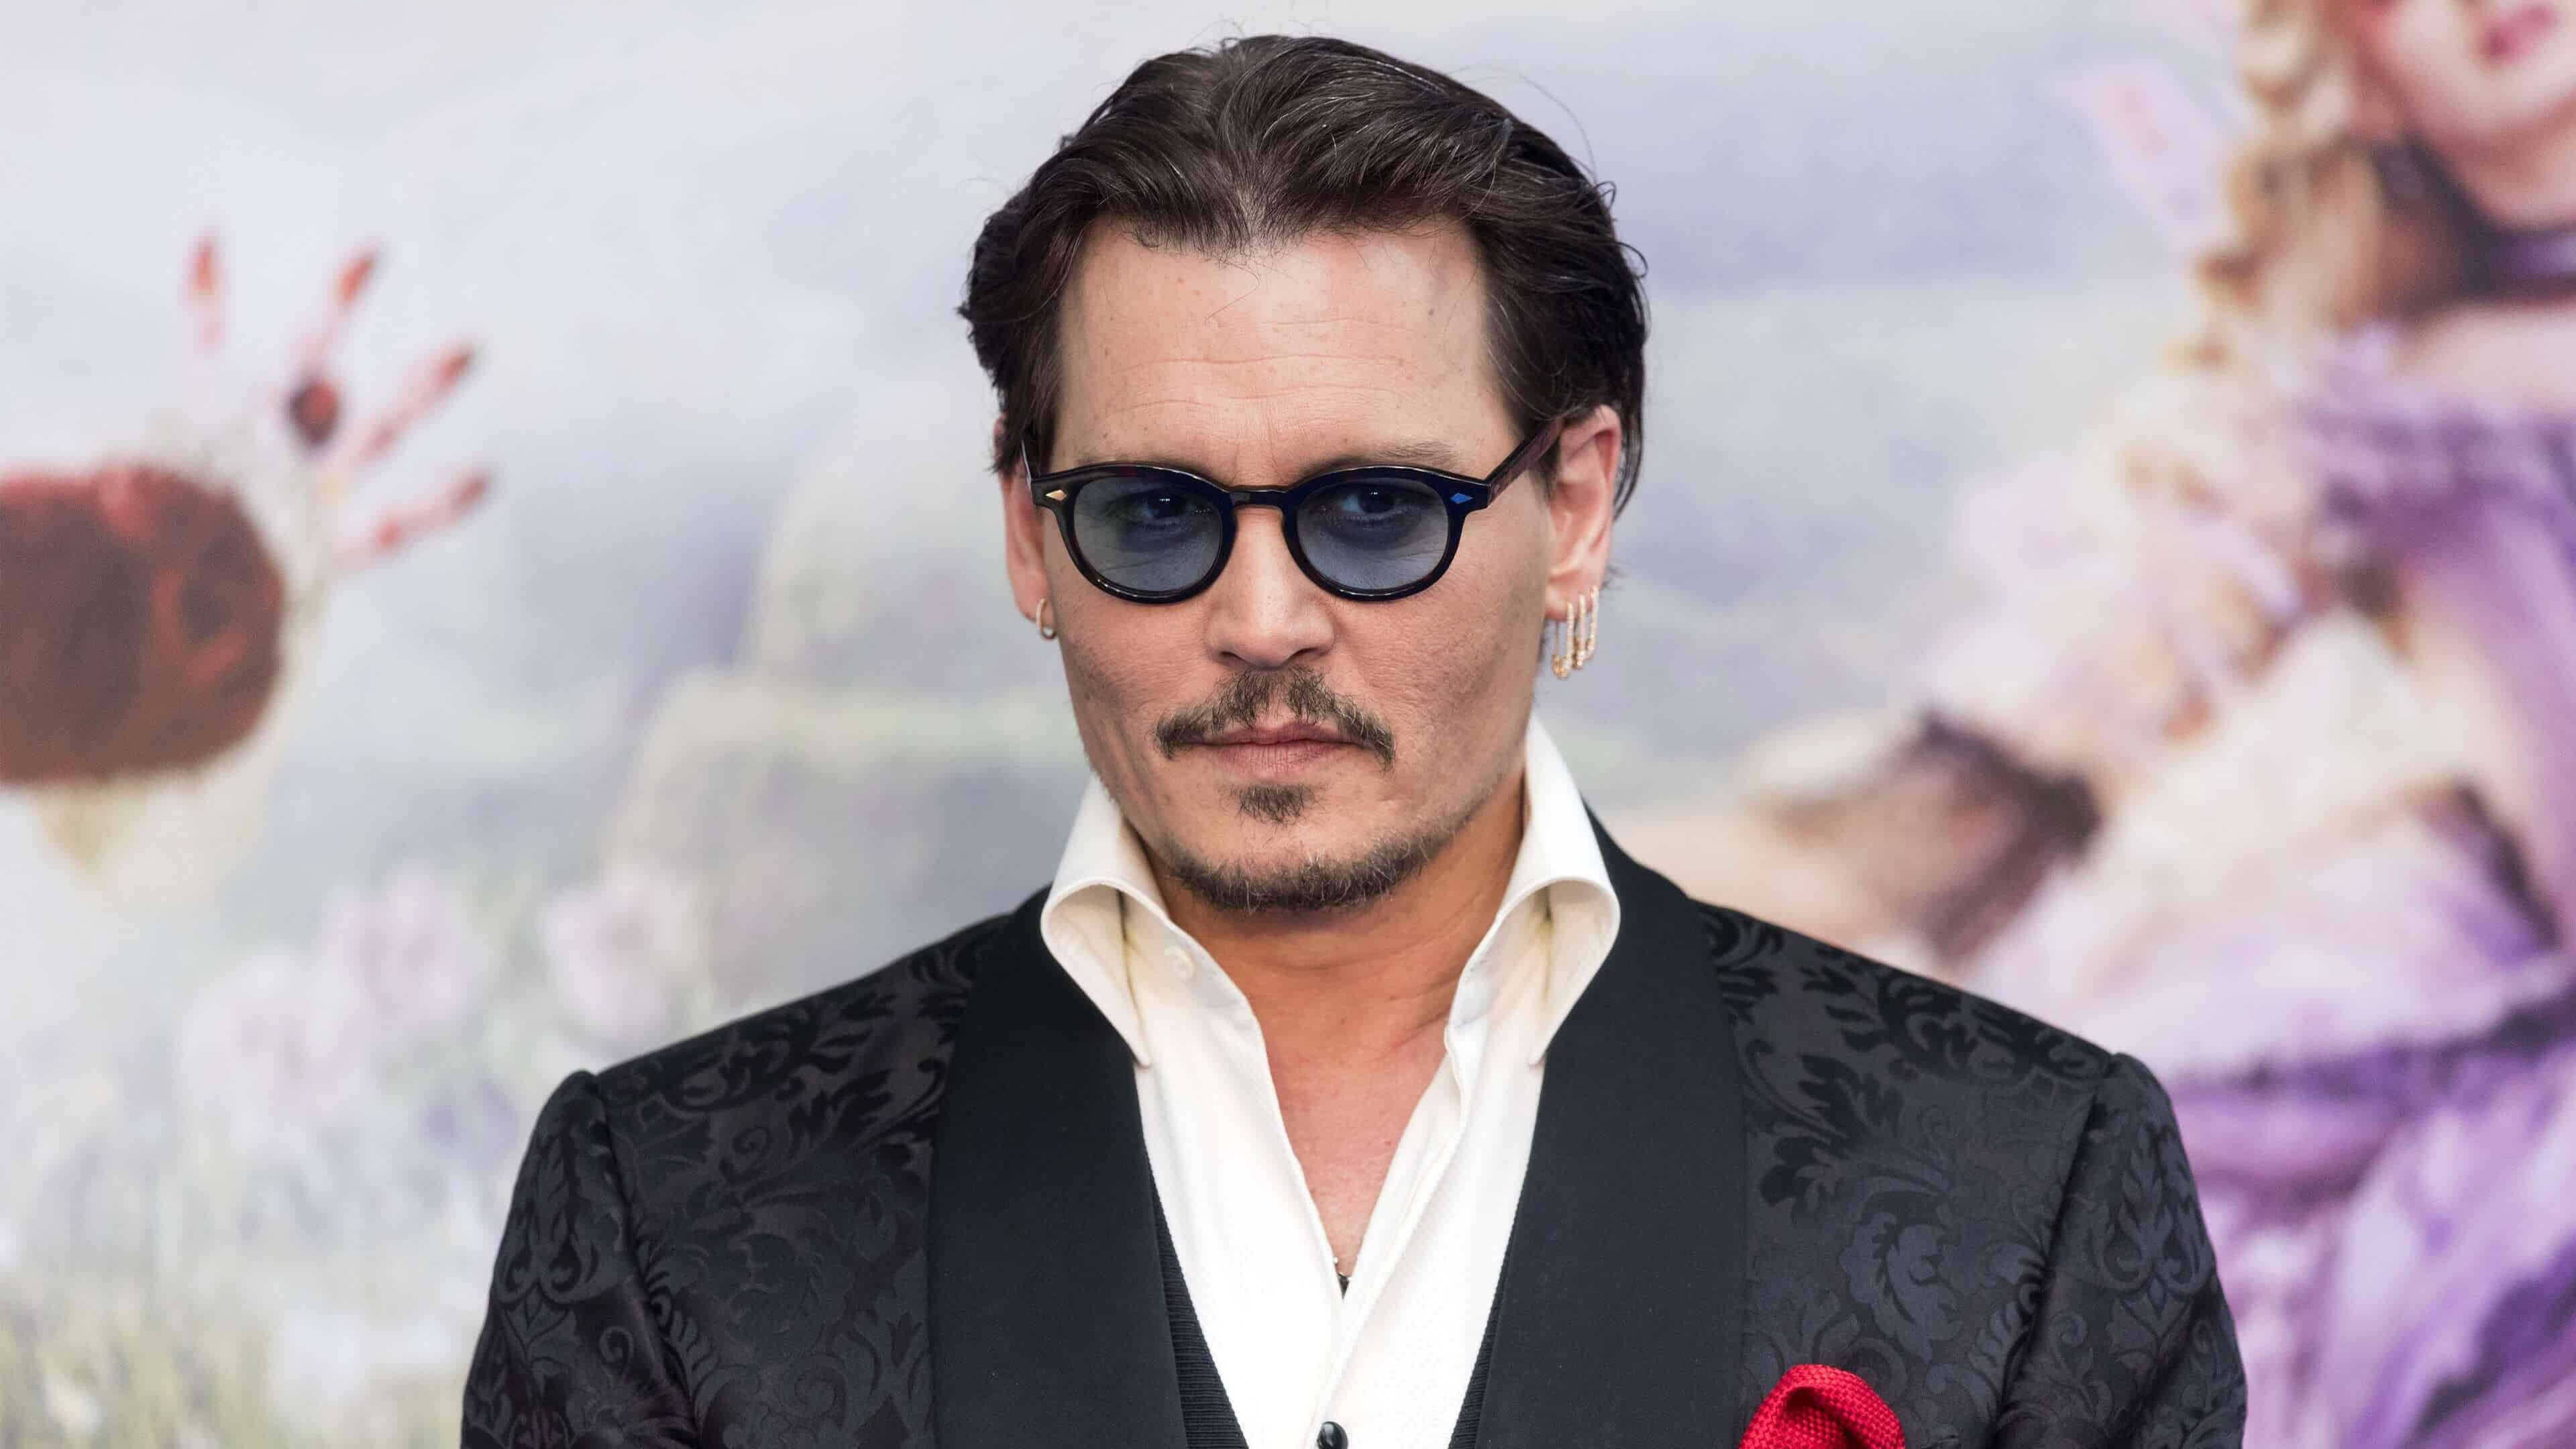 Johnny Depp: An American actor and musician, The recipient of multiple accolades. 3840x2160 4K Background.